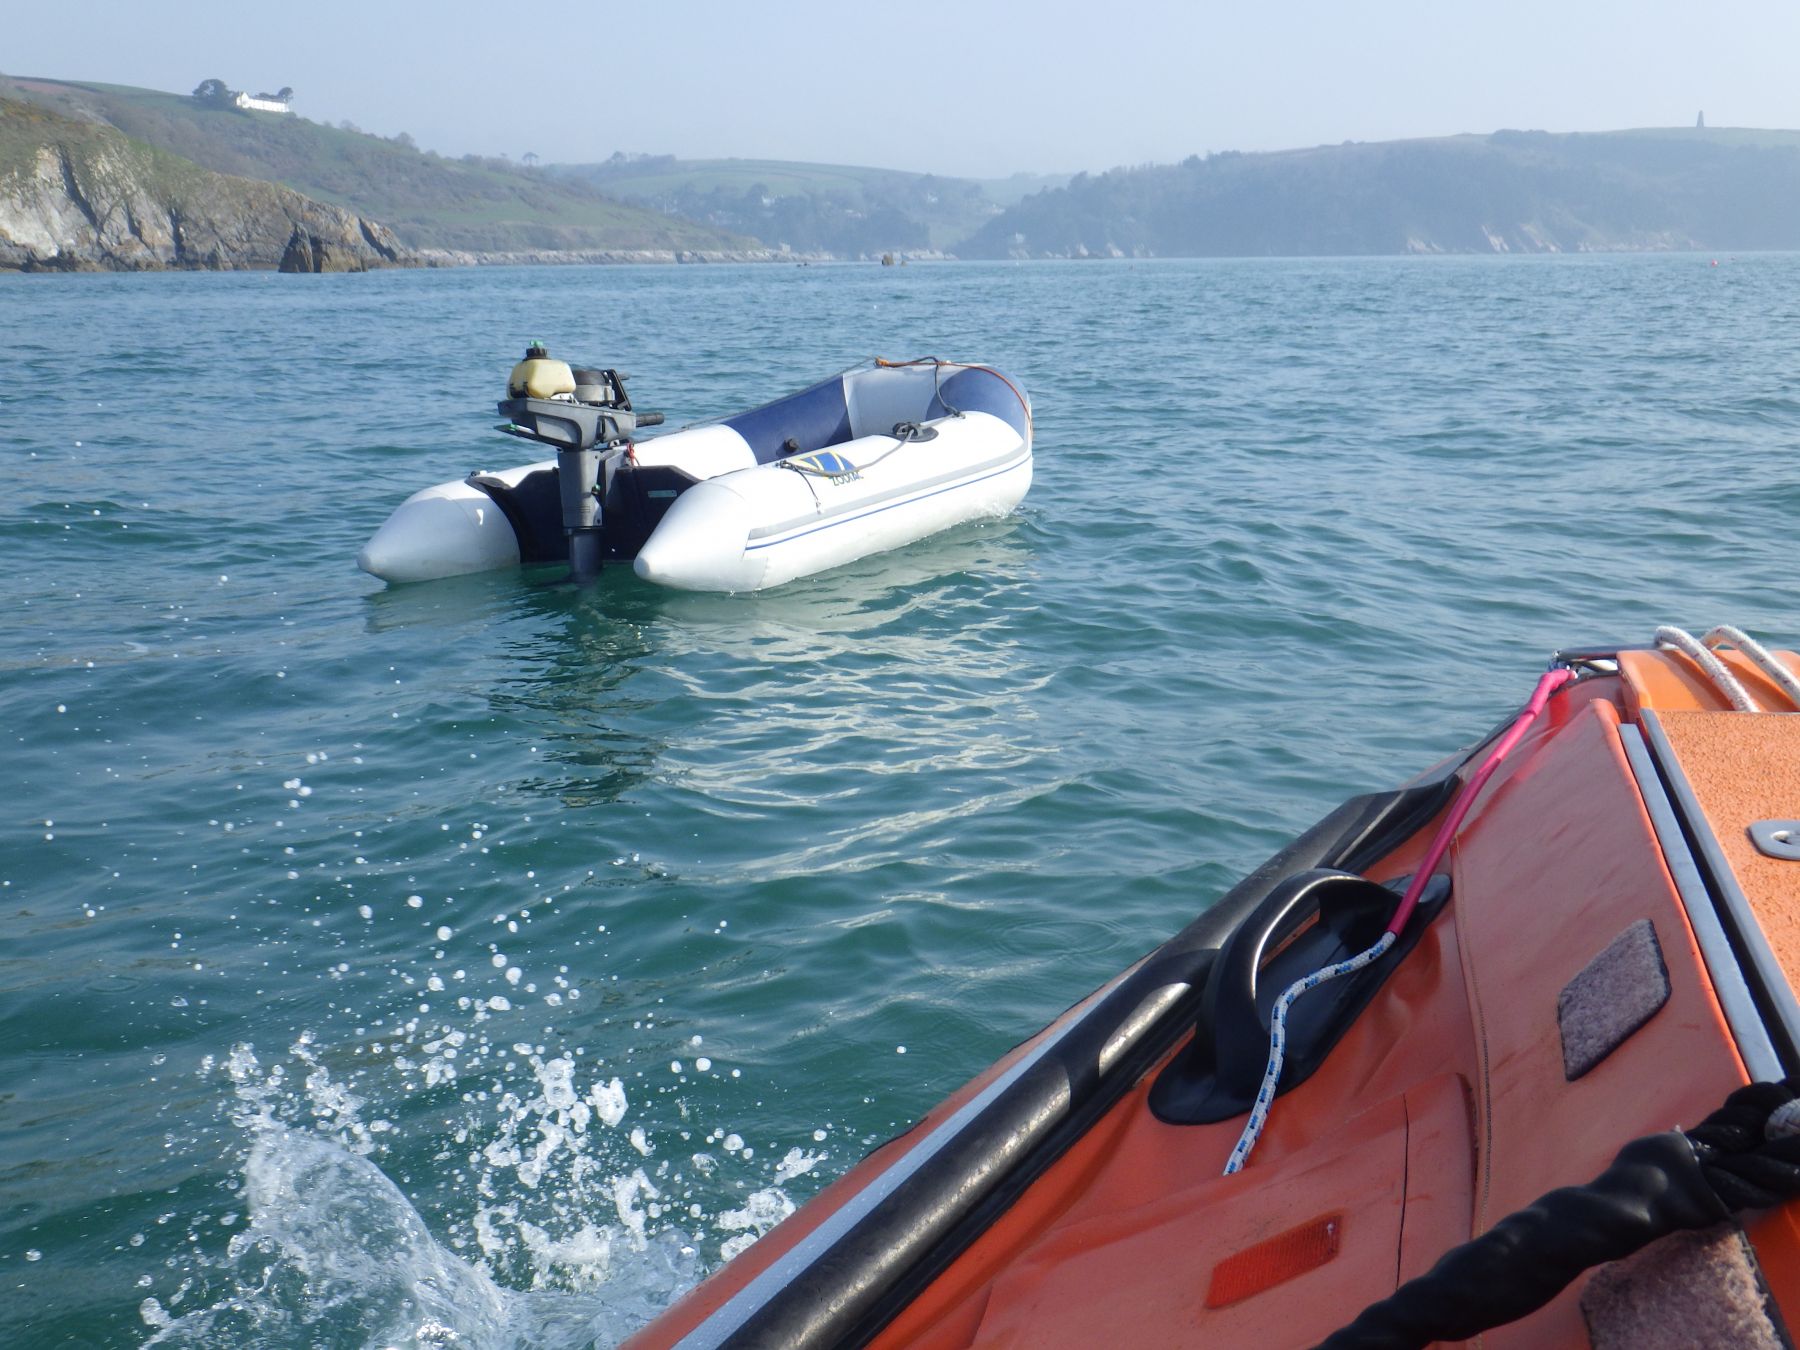 Yacht tender found drifting off Coombe Point.